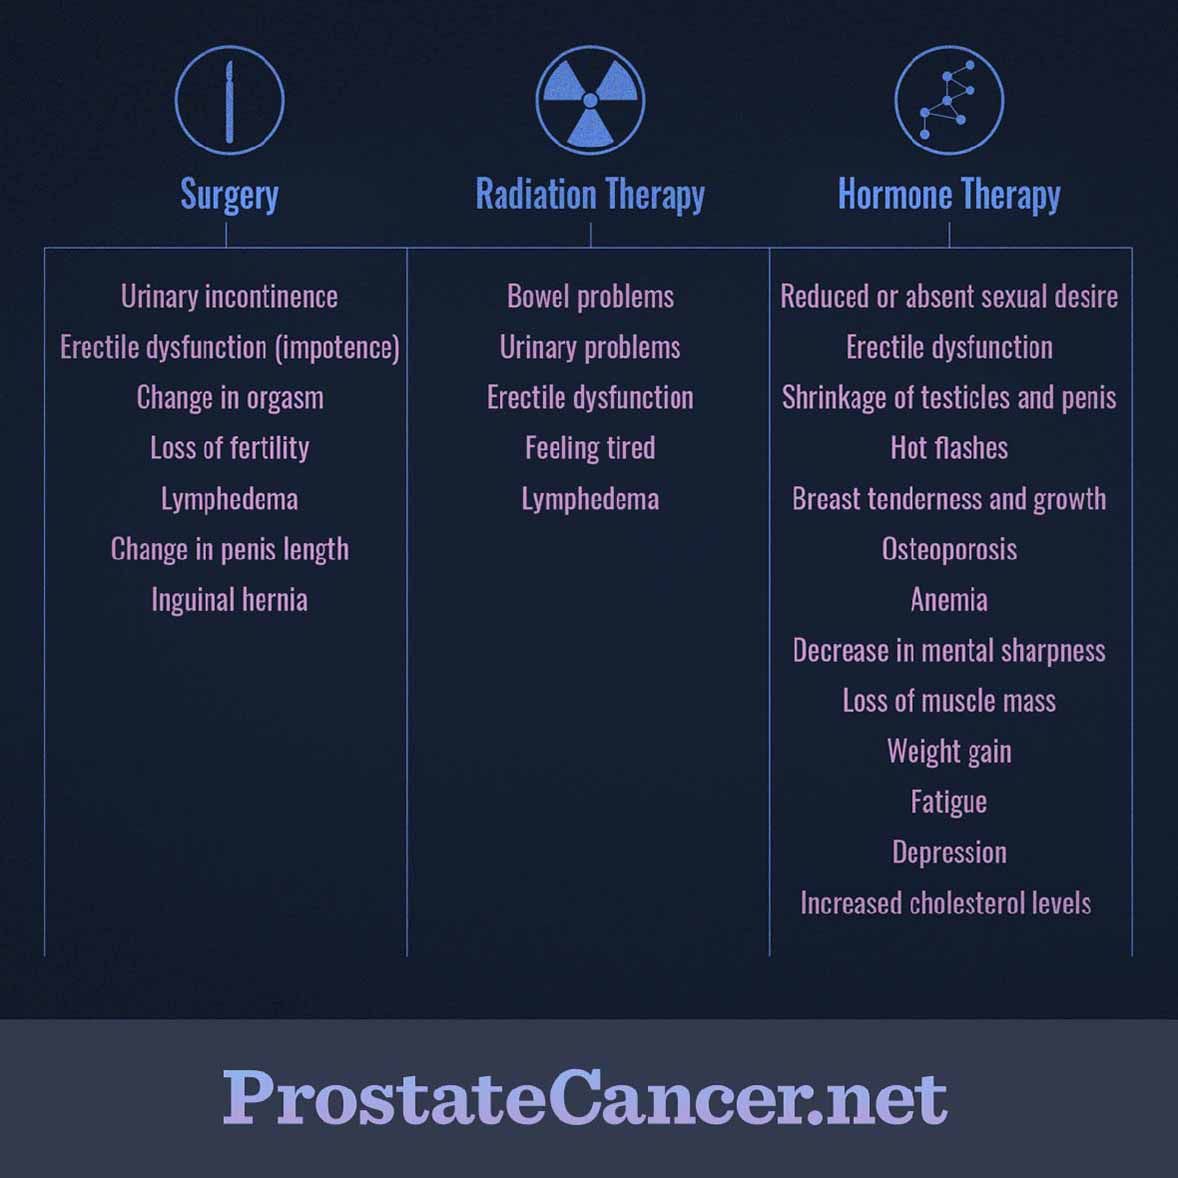 Listings of possible side effects from surgery, radiation therapy, and hormone therapy